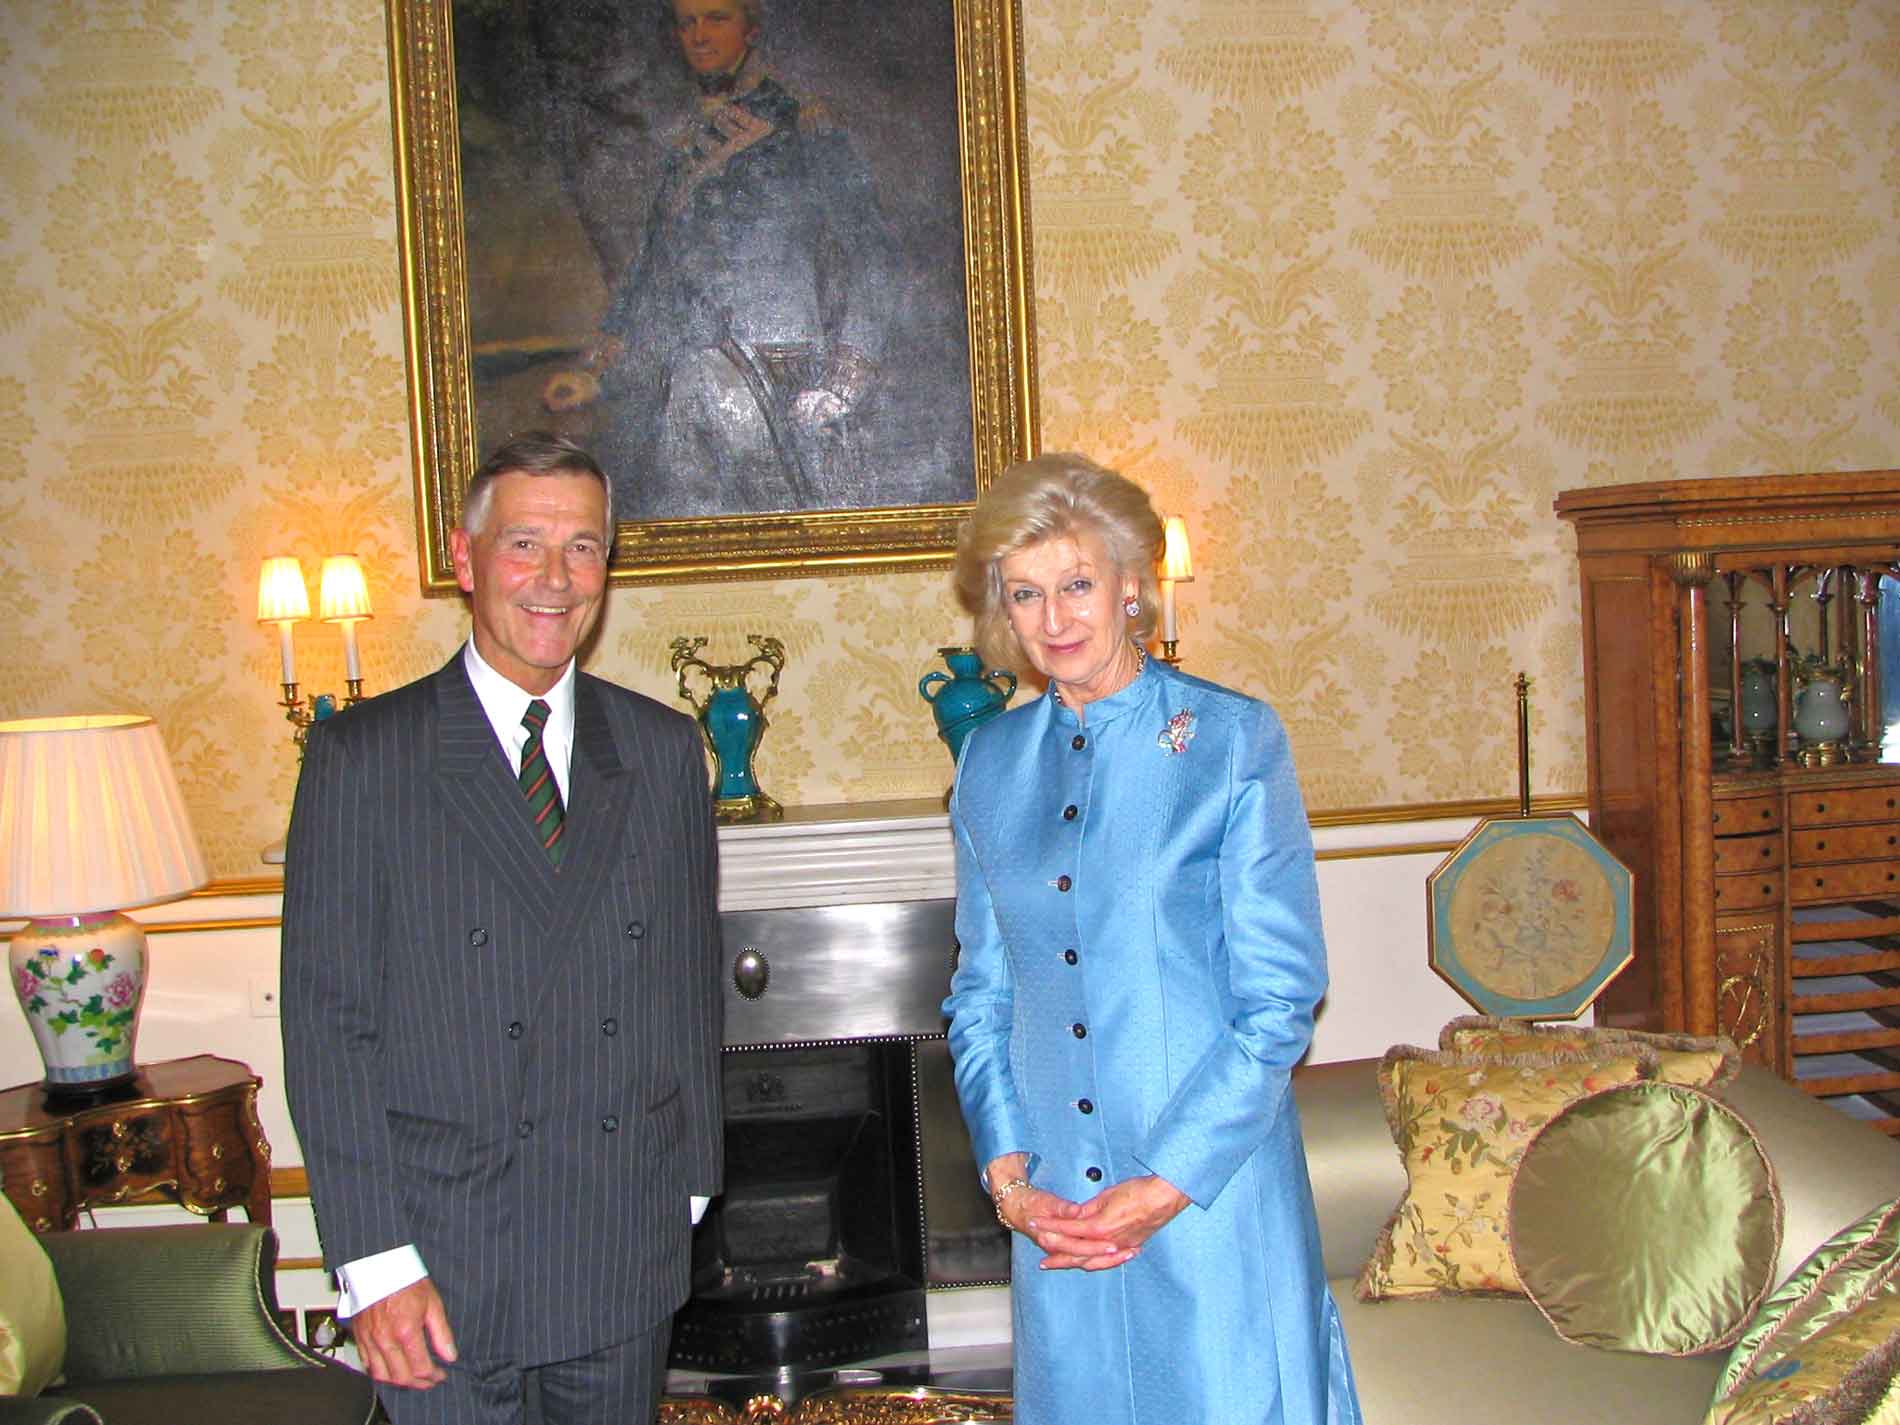 Audience With HRH Princess Alexandra, The Honourable Lady Ogilvy At Buckingham Palace After The Trip